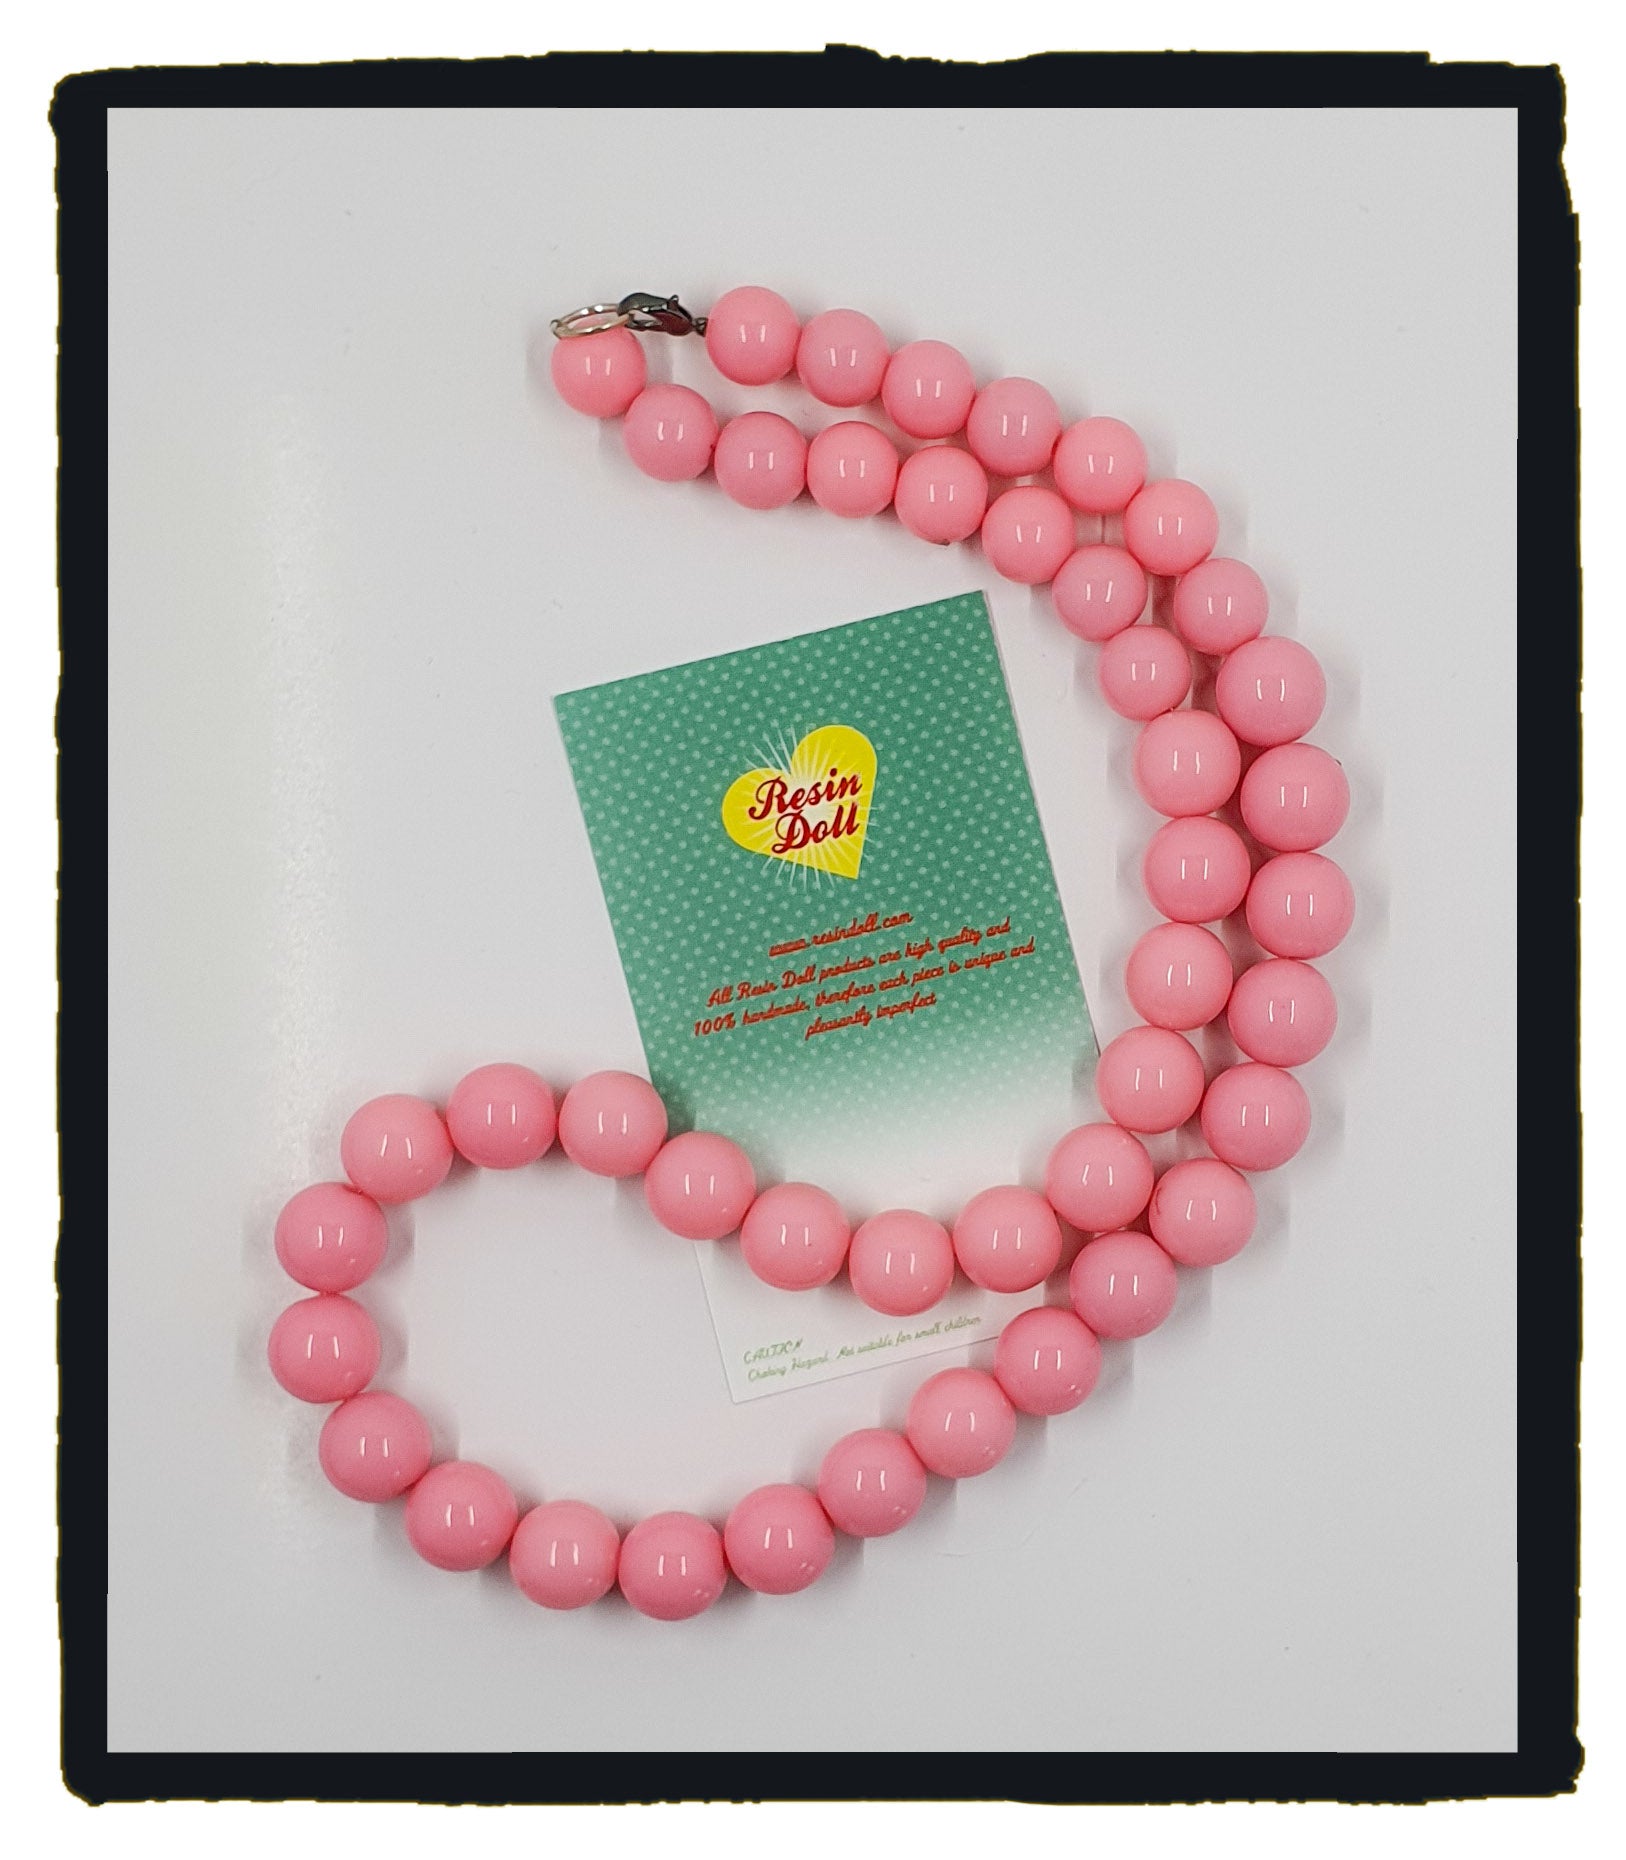 Lt pink 16mm Gumball necklace